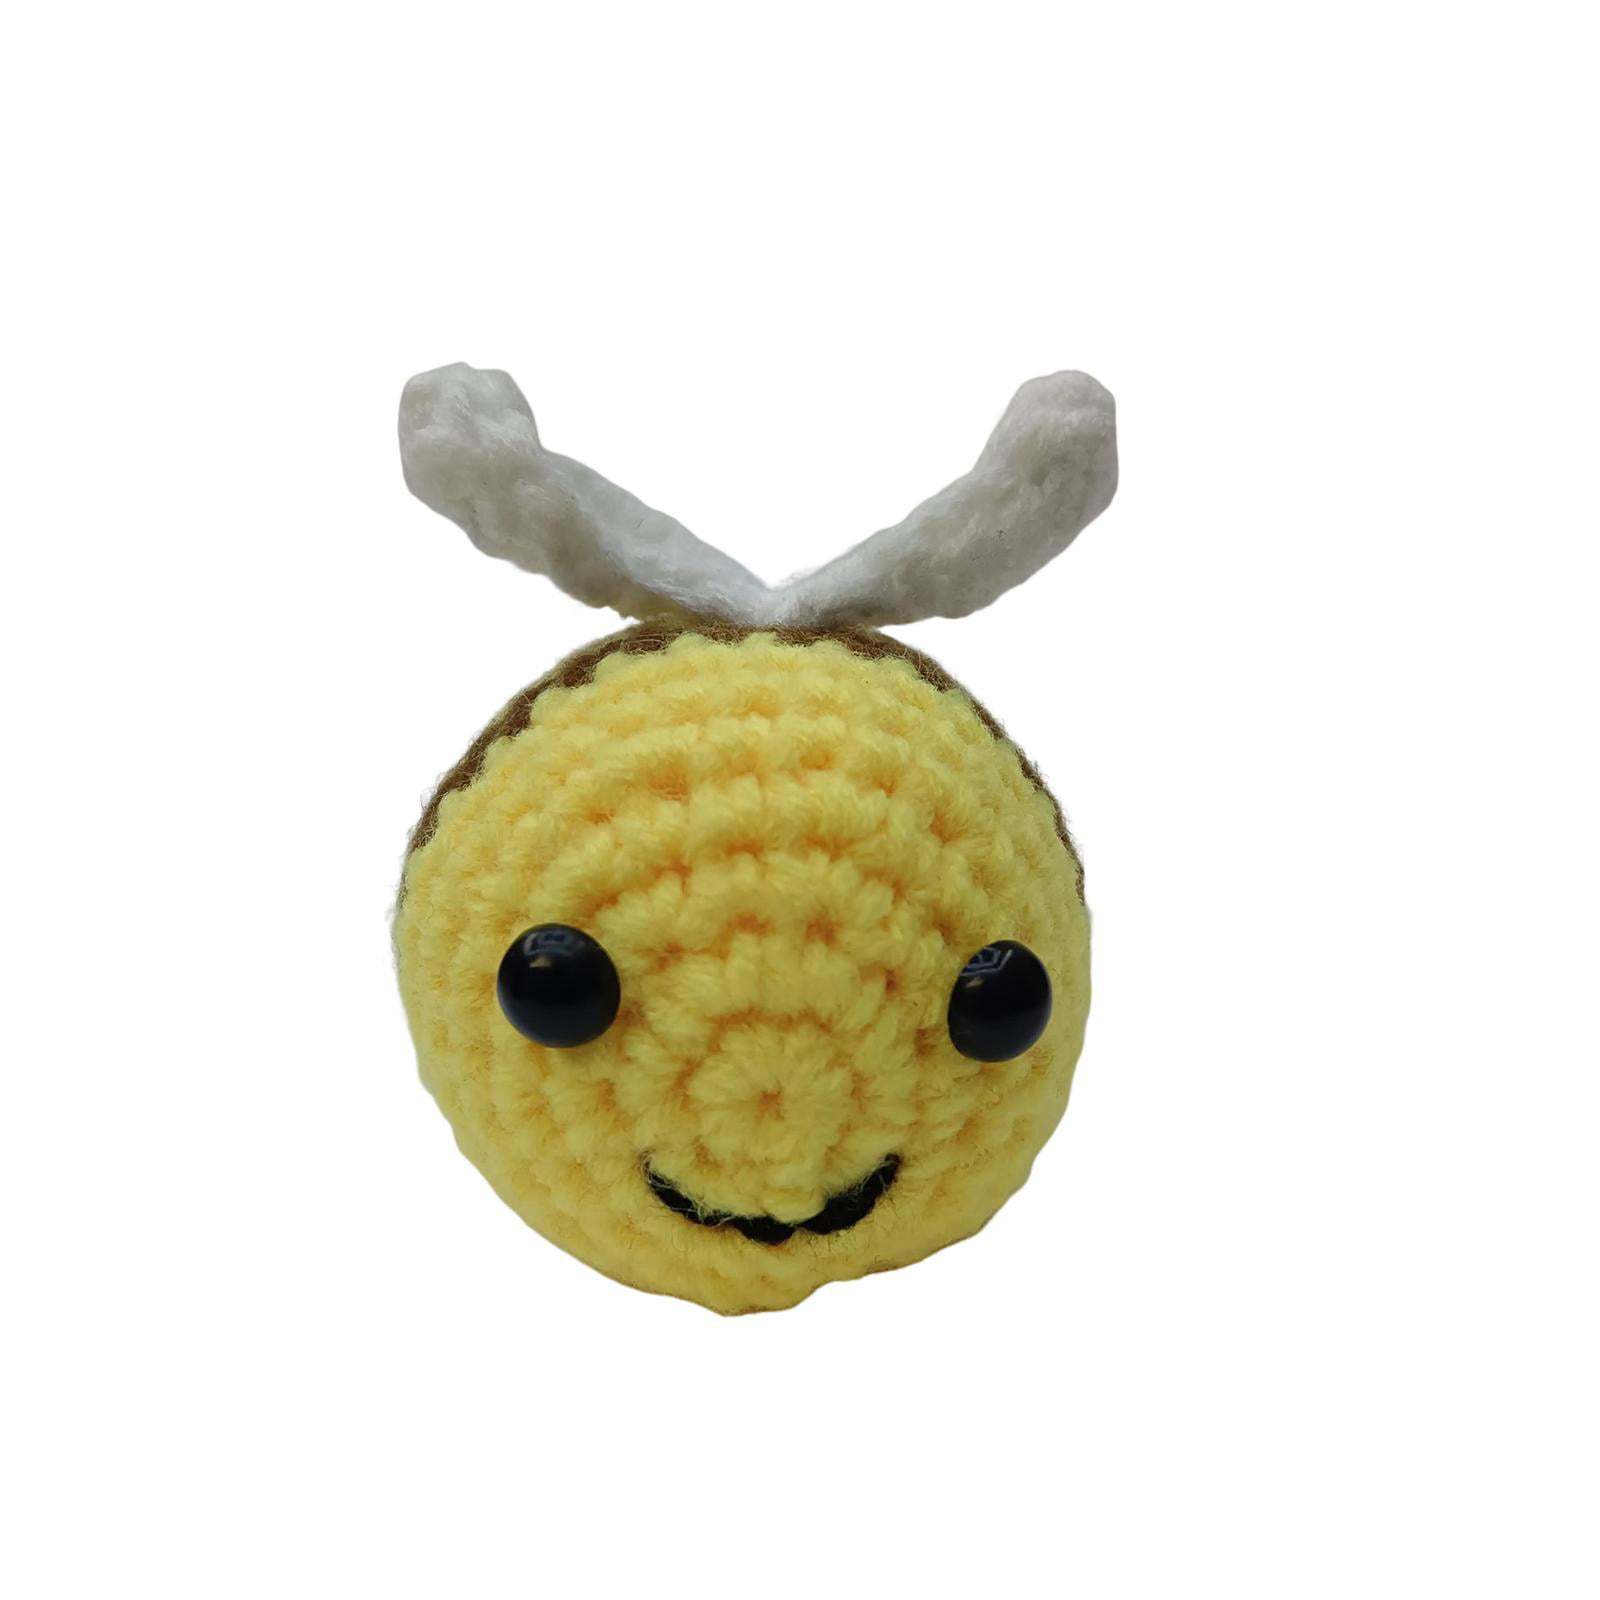 Beginner'S Crochet Kit For Adults To Diy 2-3 Adorable Little Bees, Suitable  For Dolls Gifts, Stress Relief And Knitting Learning, Including Complete  Material Pack, Guided Video Tutorials, English Instructions, Crochet Hook,  Scissors